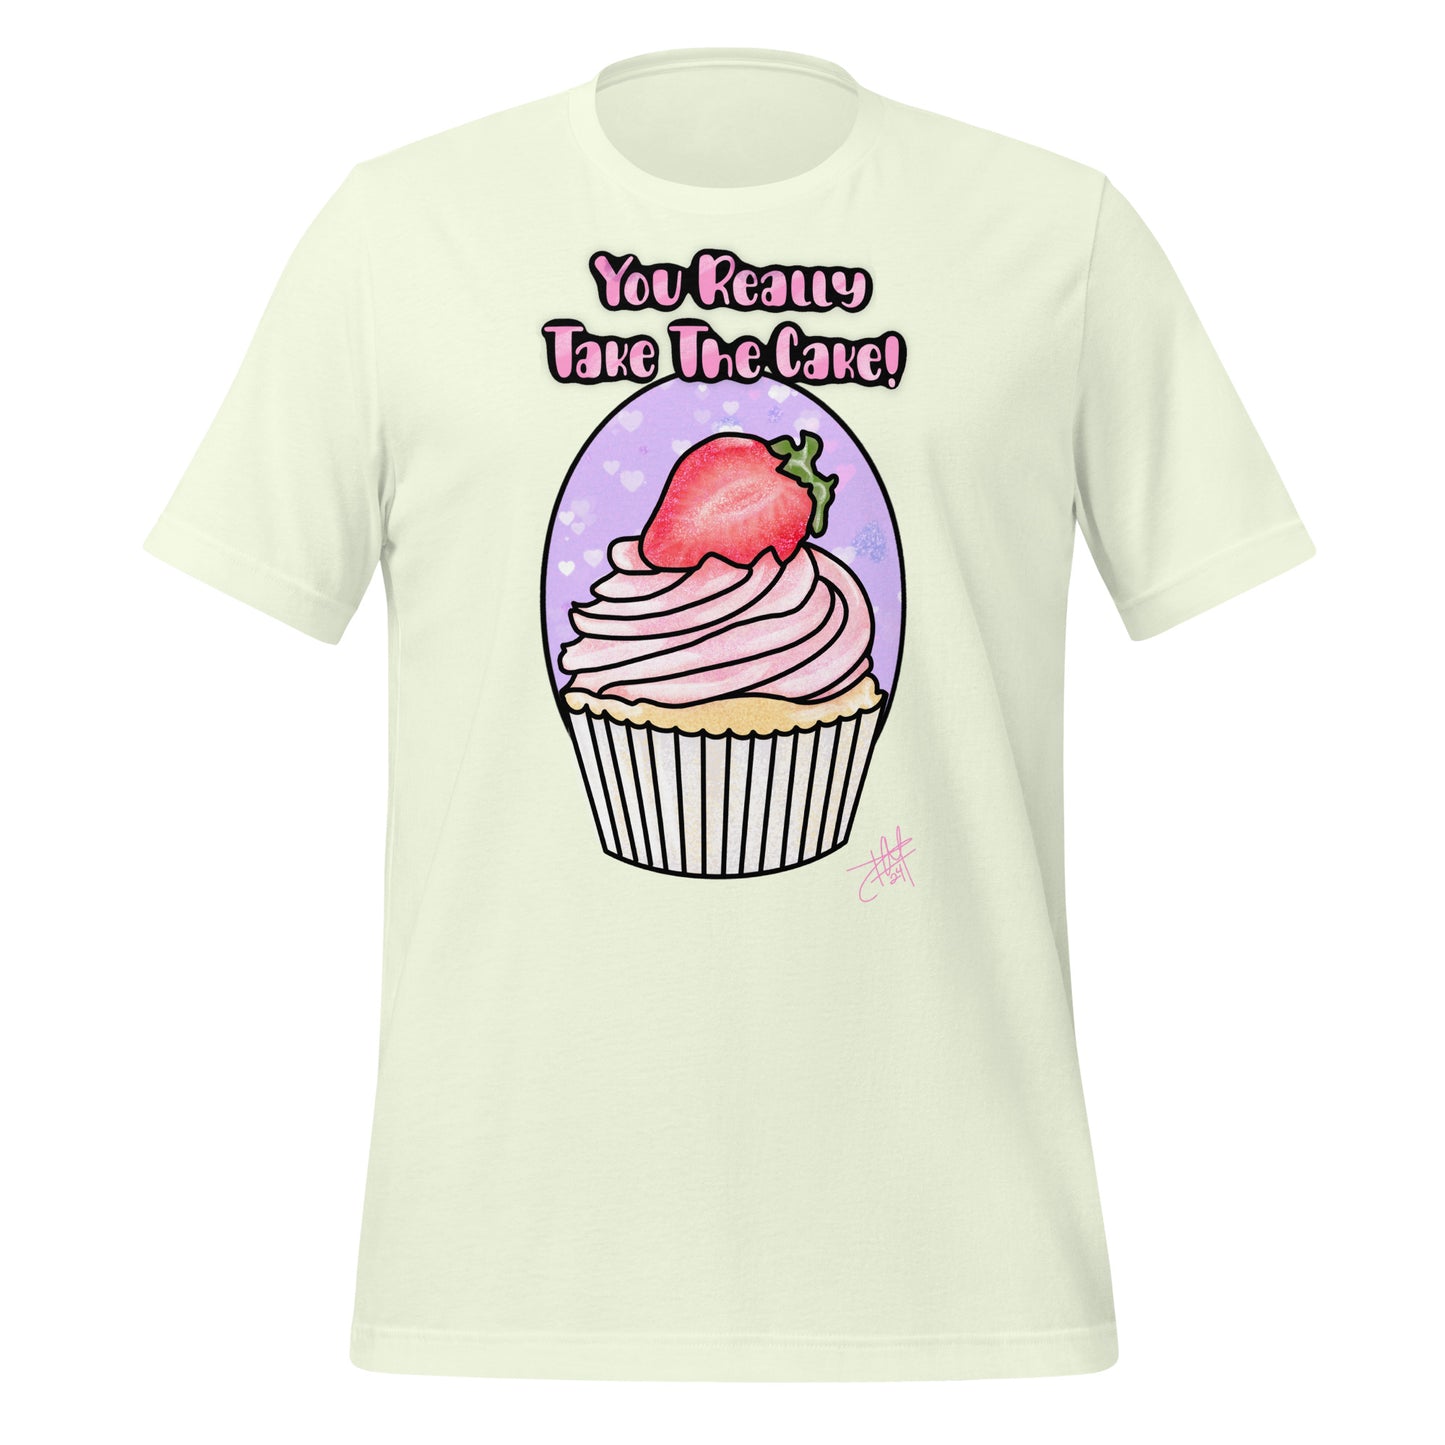 You Really Take The Cake Unisex T-Shirt